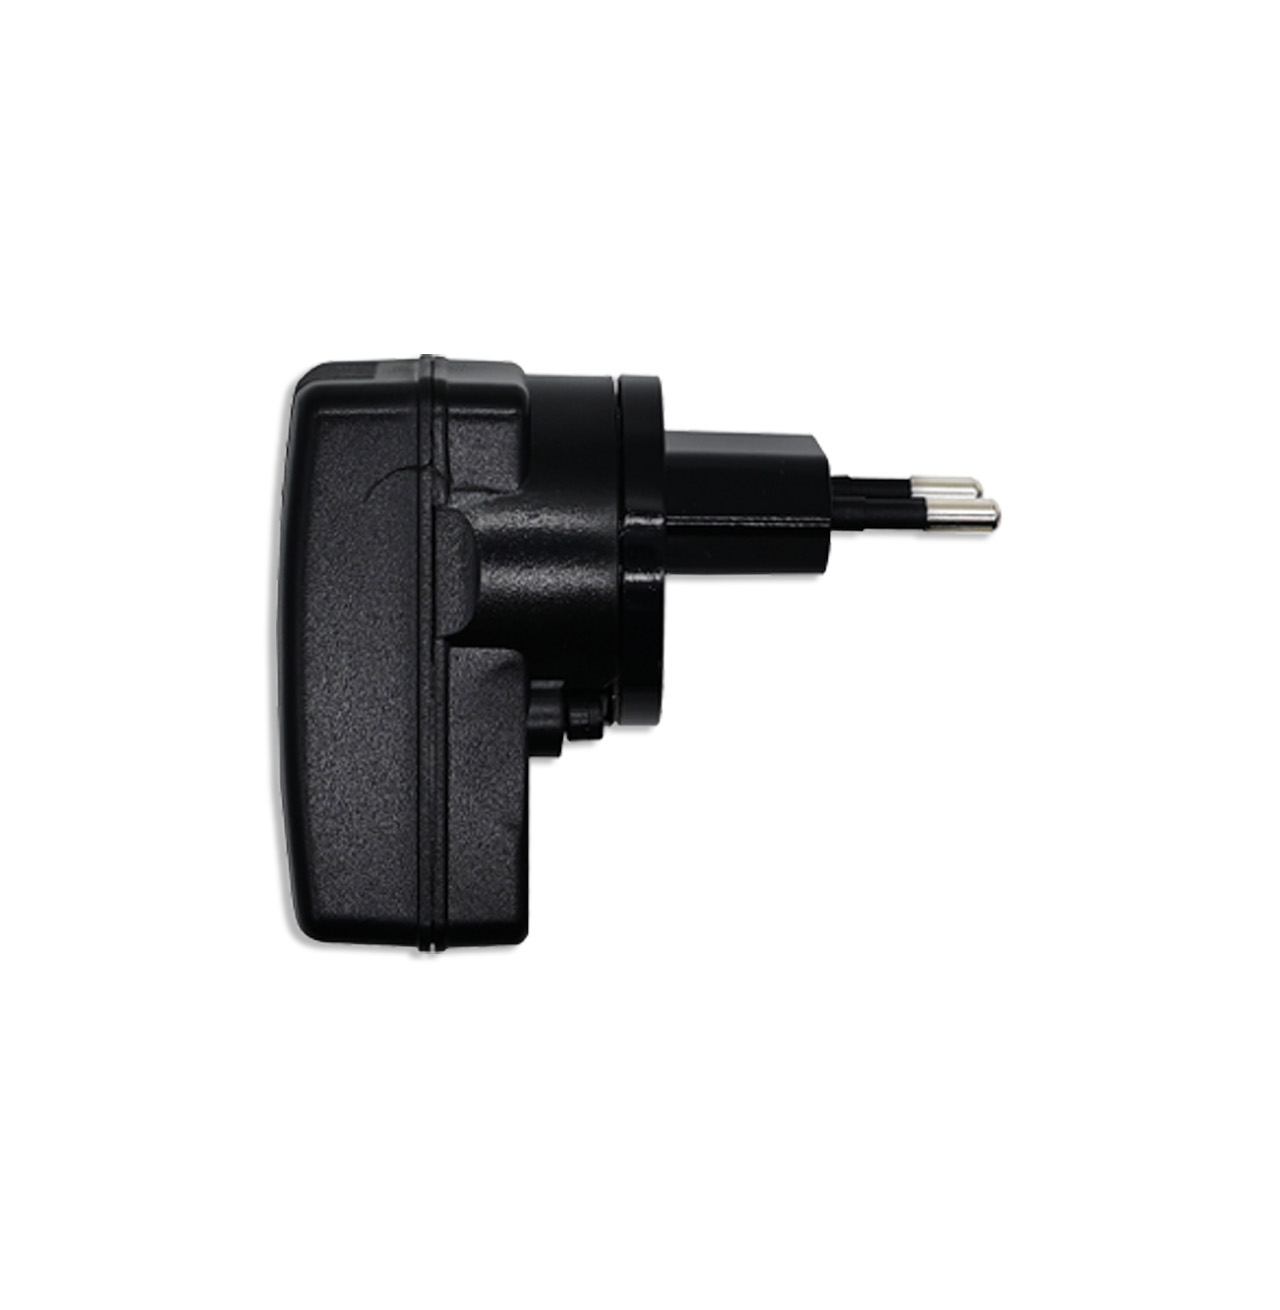 Power Adapter 5V2A, can be equipped with UK regulation, RoHS